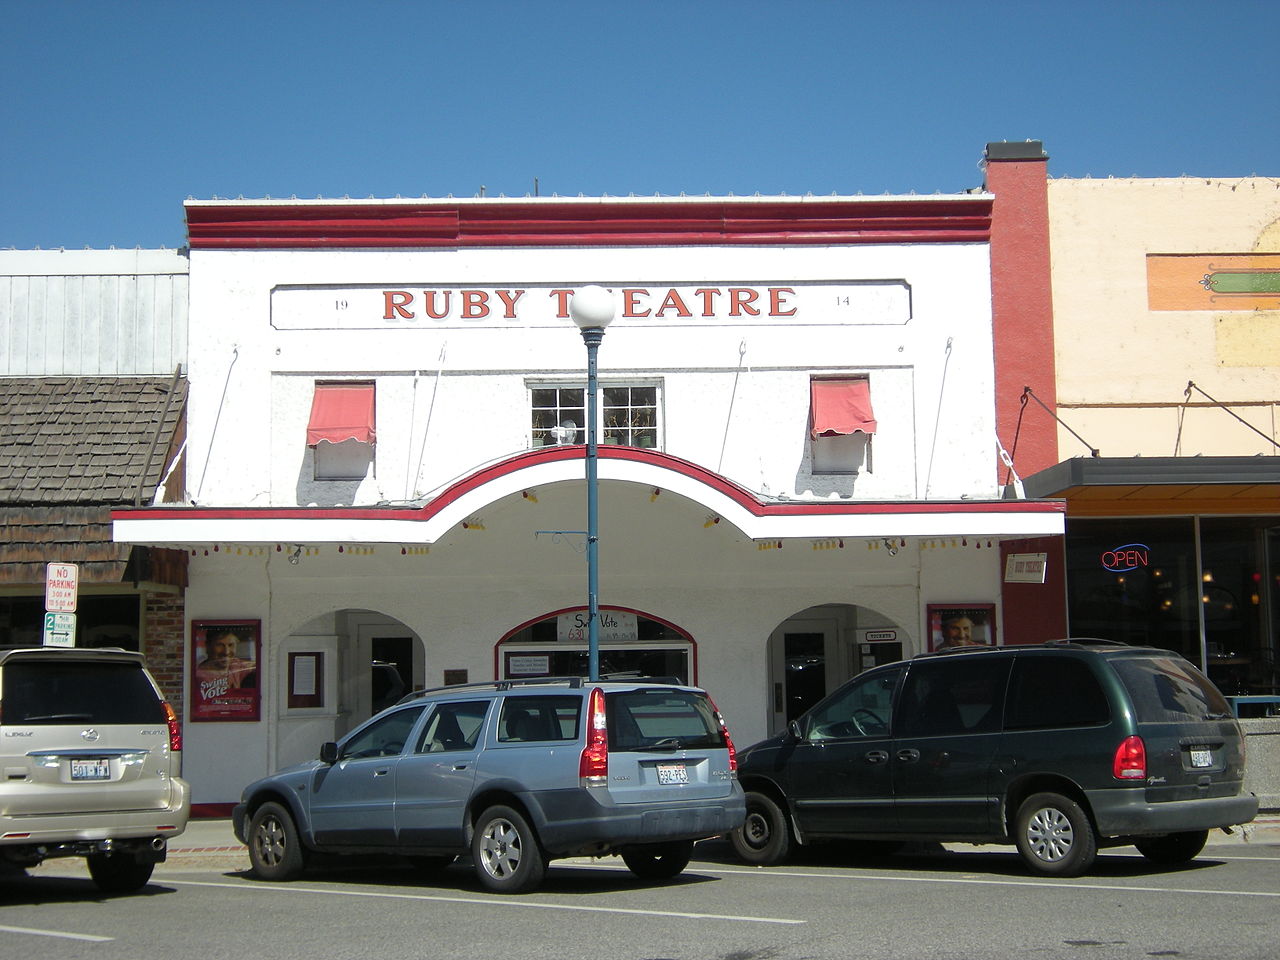 Ruby Theatre was built in 1914 and is listed on the National Register of Historic Places.